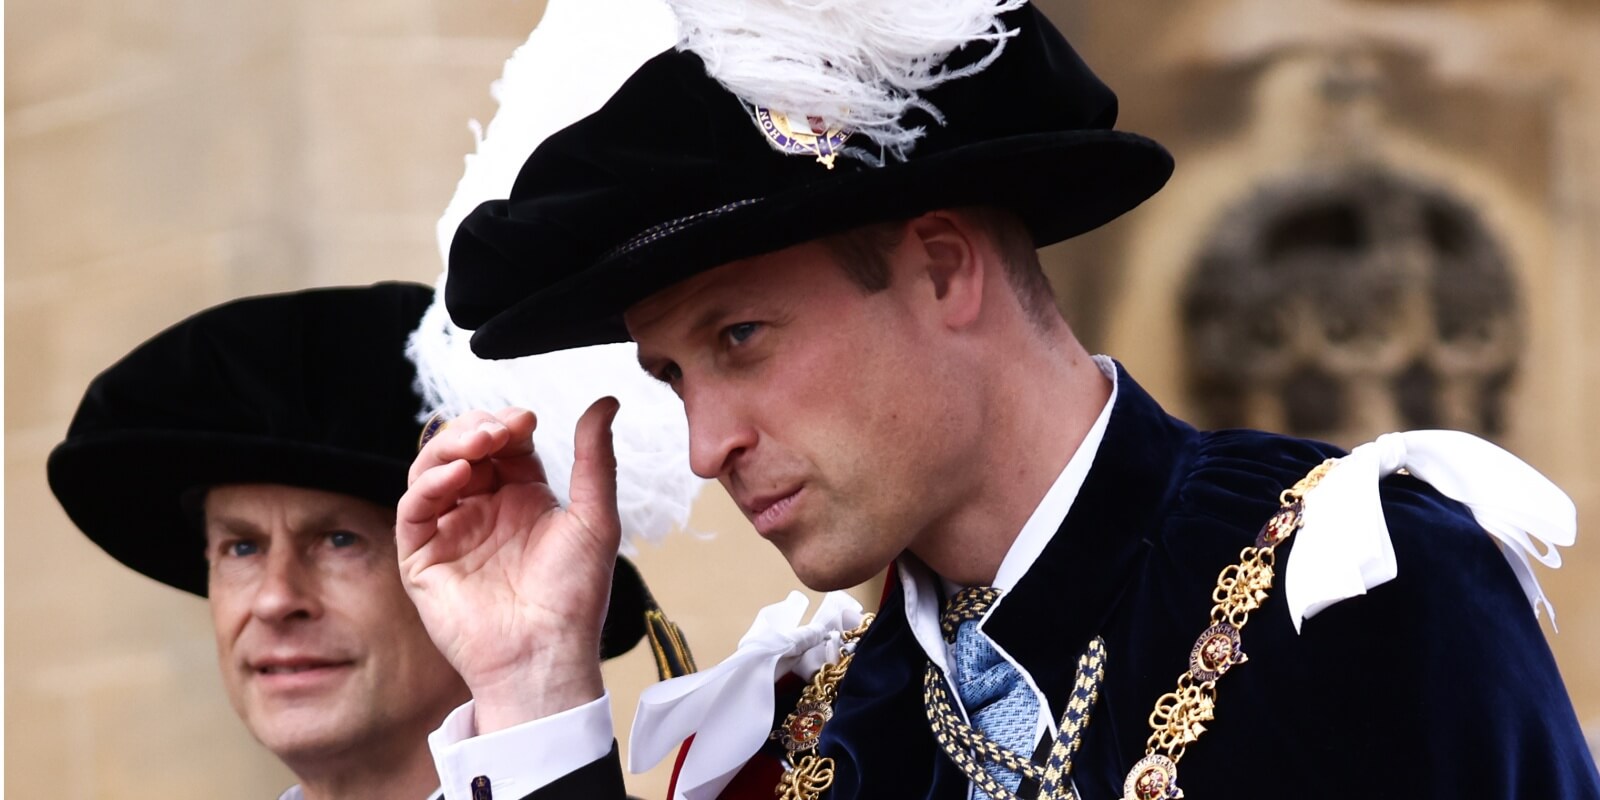 Prince William and his uncle, Prince Edward, at the Order Of The Garter Service at Windsor Castle on June 19, 2023 in Windsor, England.